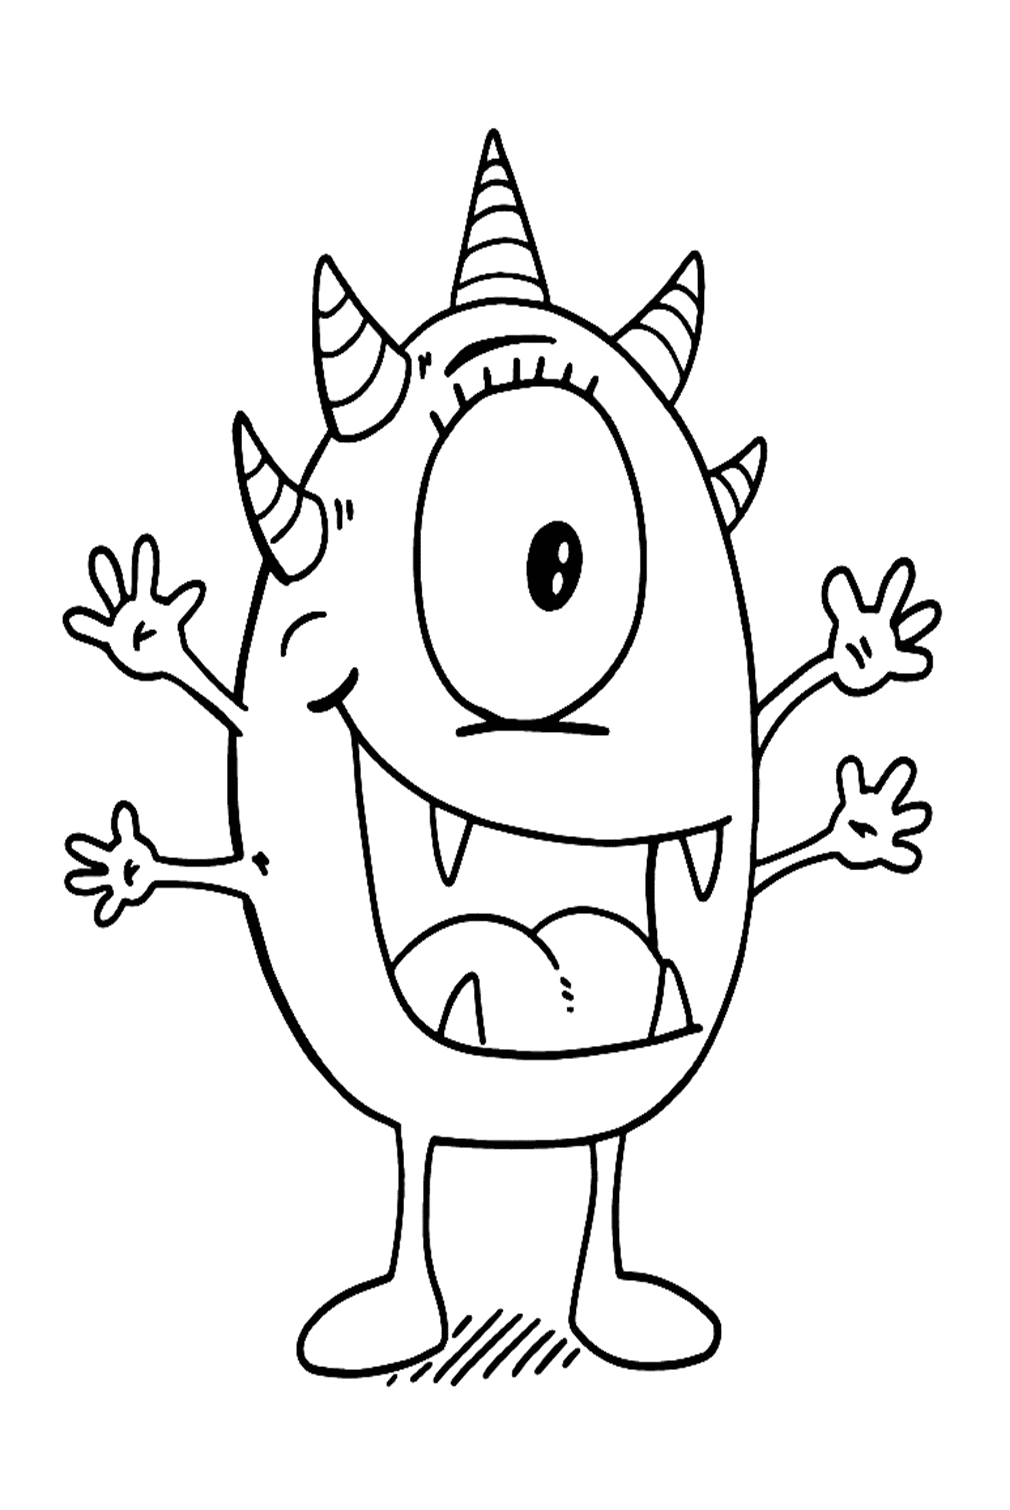 Scary Monster Printable Coloring Pages from Halloween Monsters